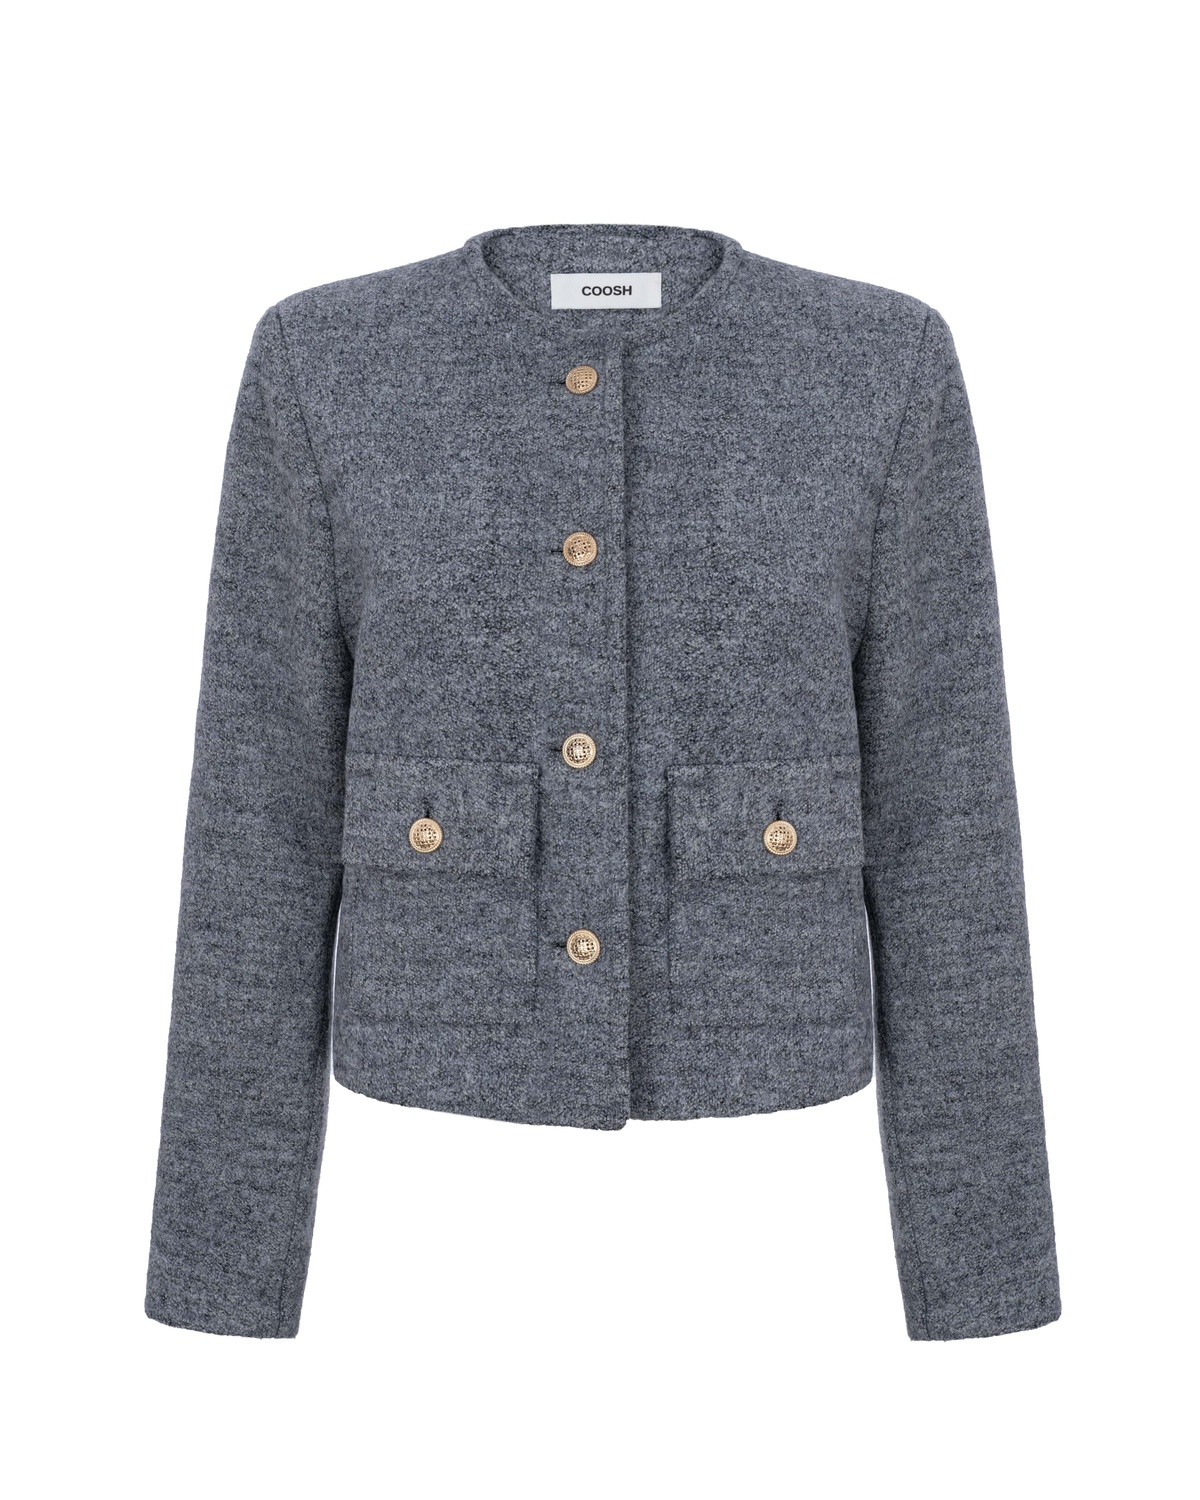 Cardigan Blazer with Pockets in Premium Boucle 